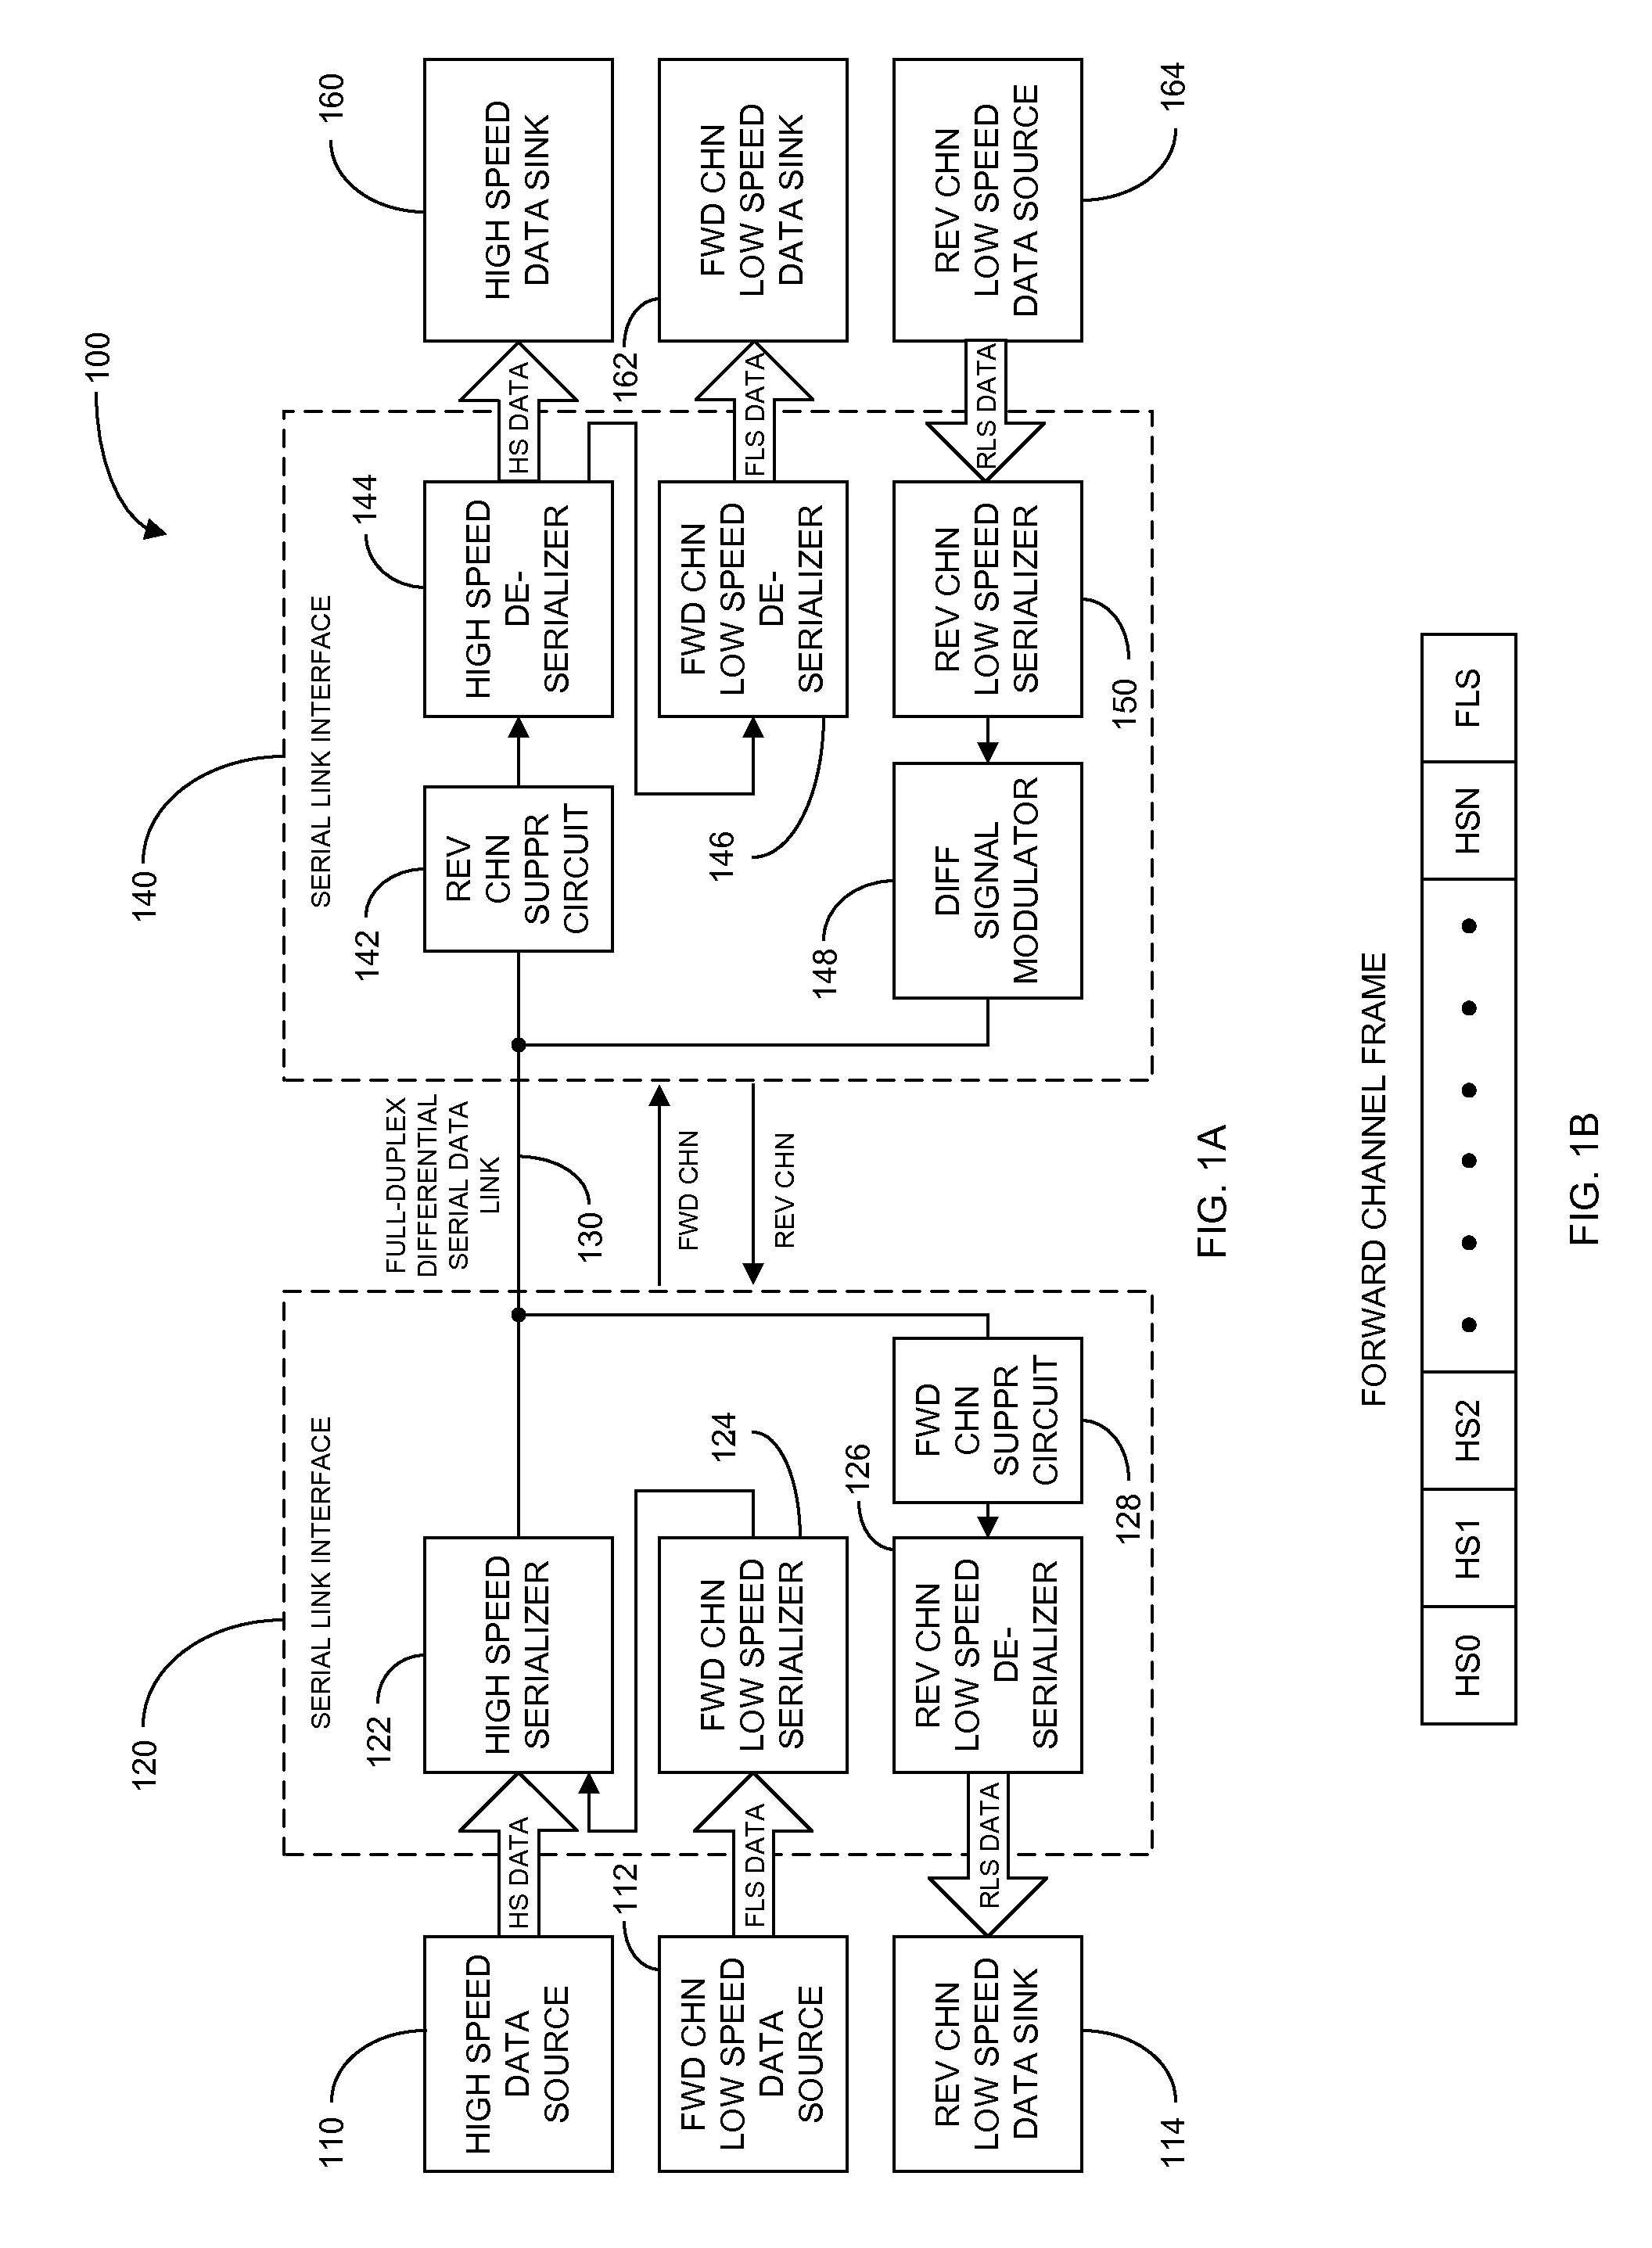 System and method for transferring data over full-duplex differential serial link